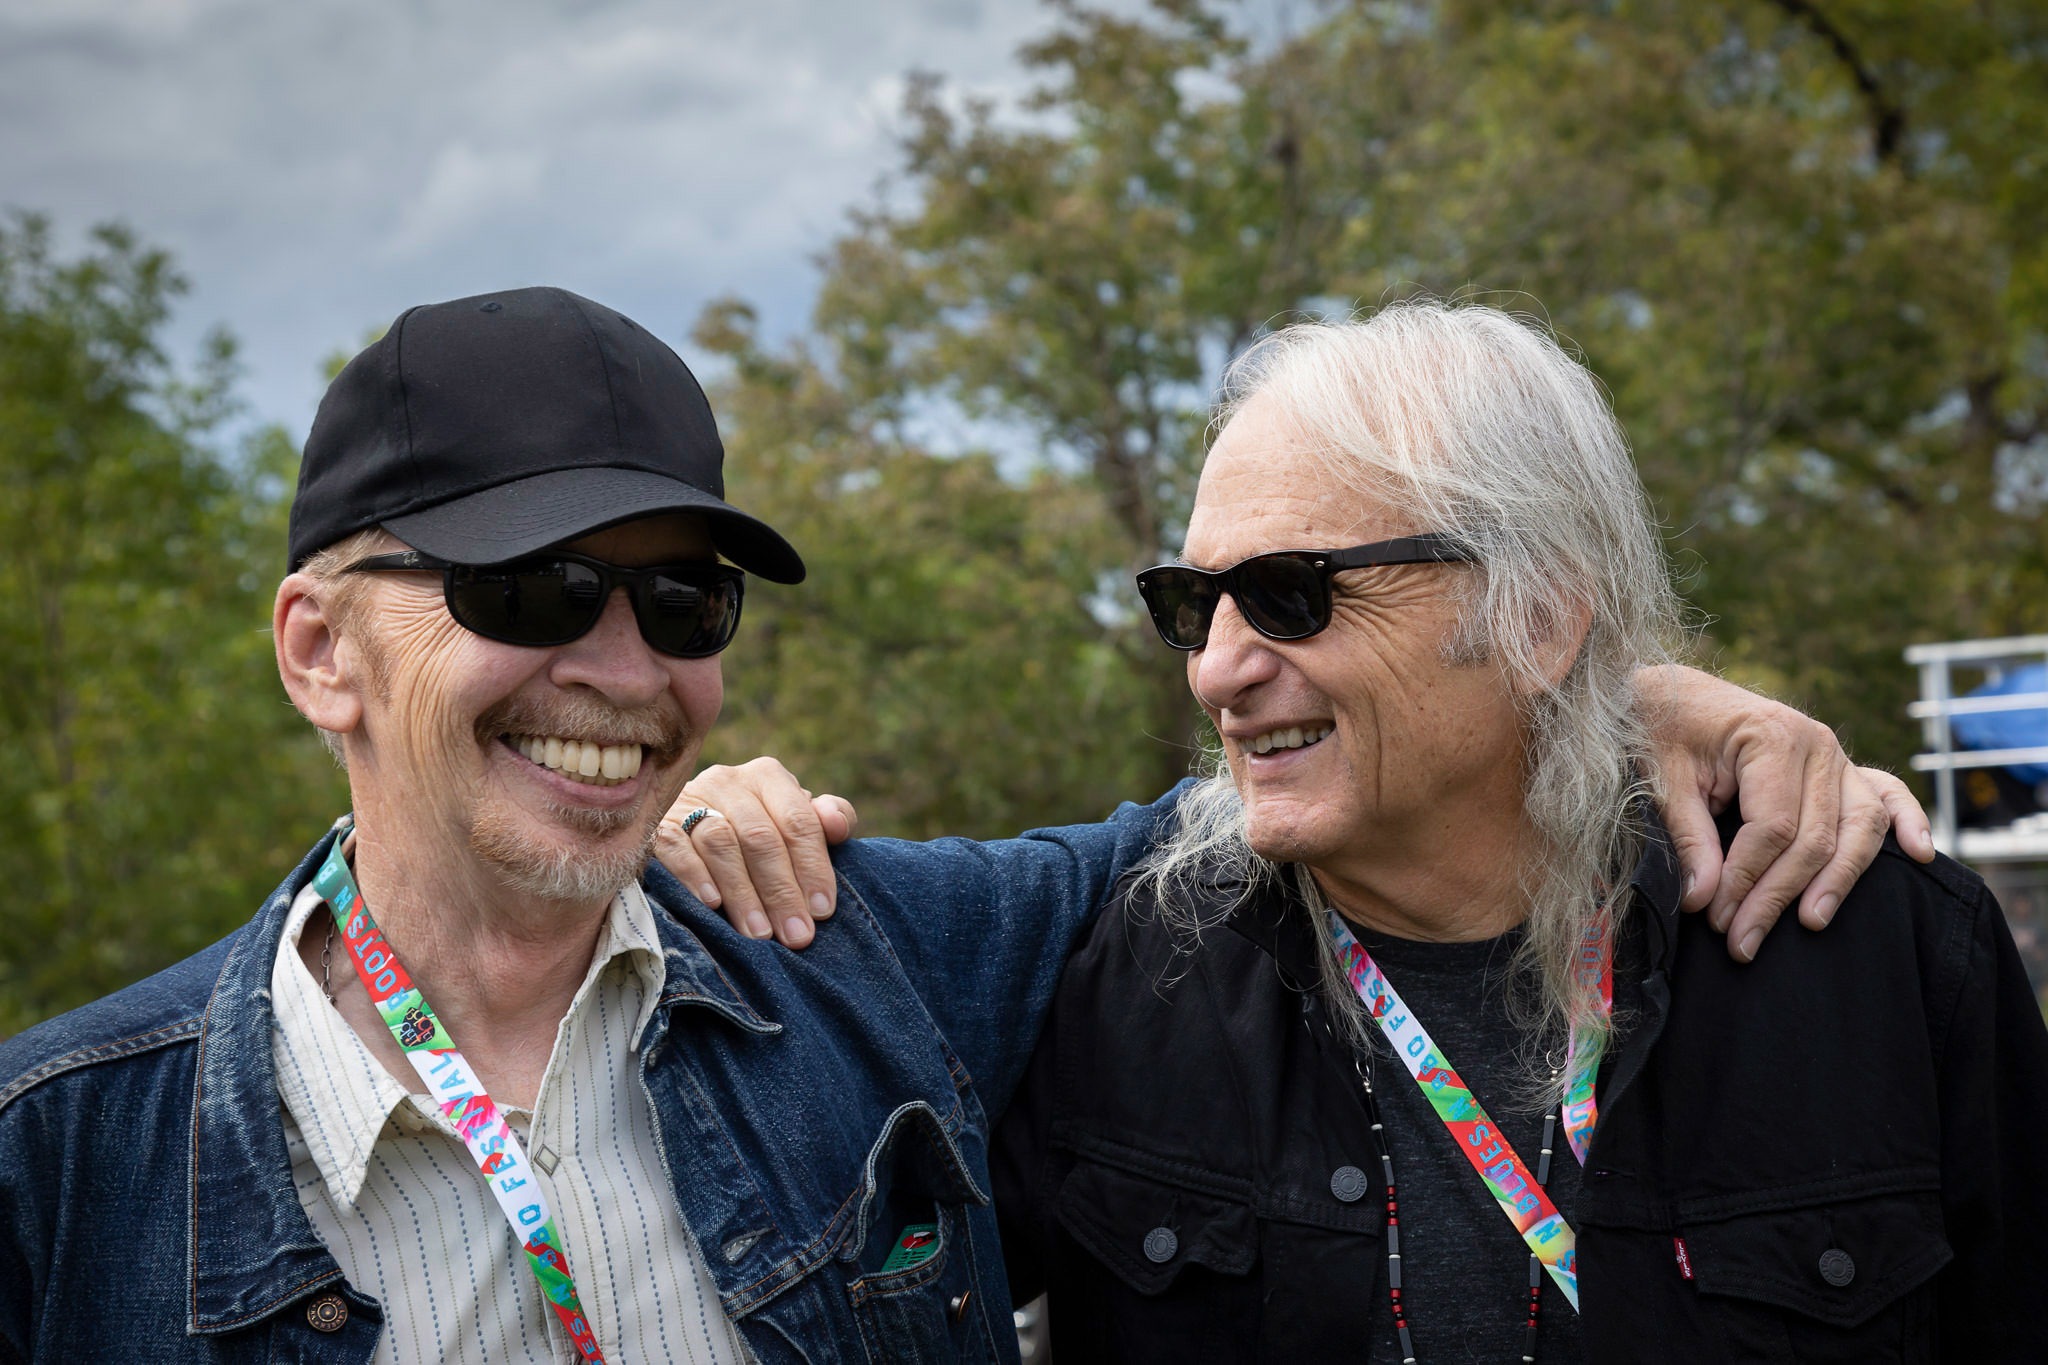 An image of two musicians at a music festival.